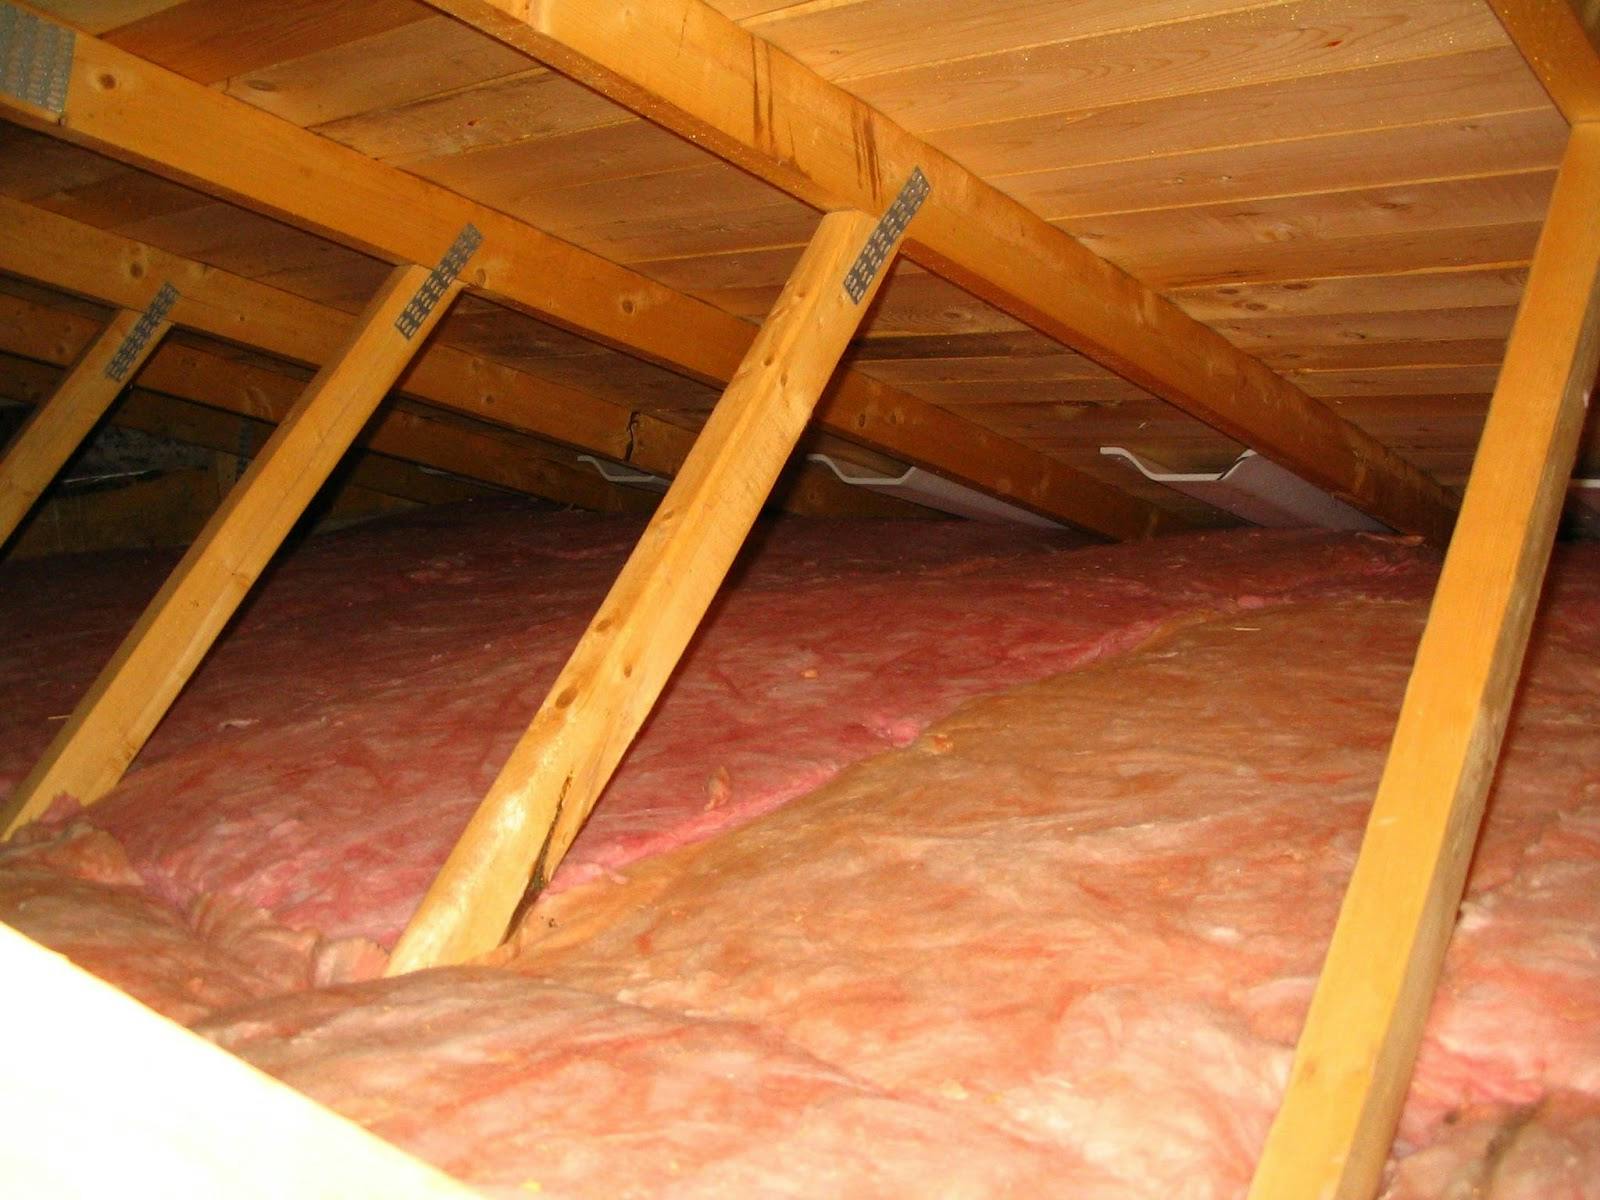 Insulating Ceilings Module 2 4 Installation Process Guides